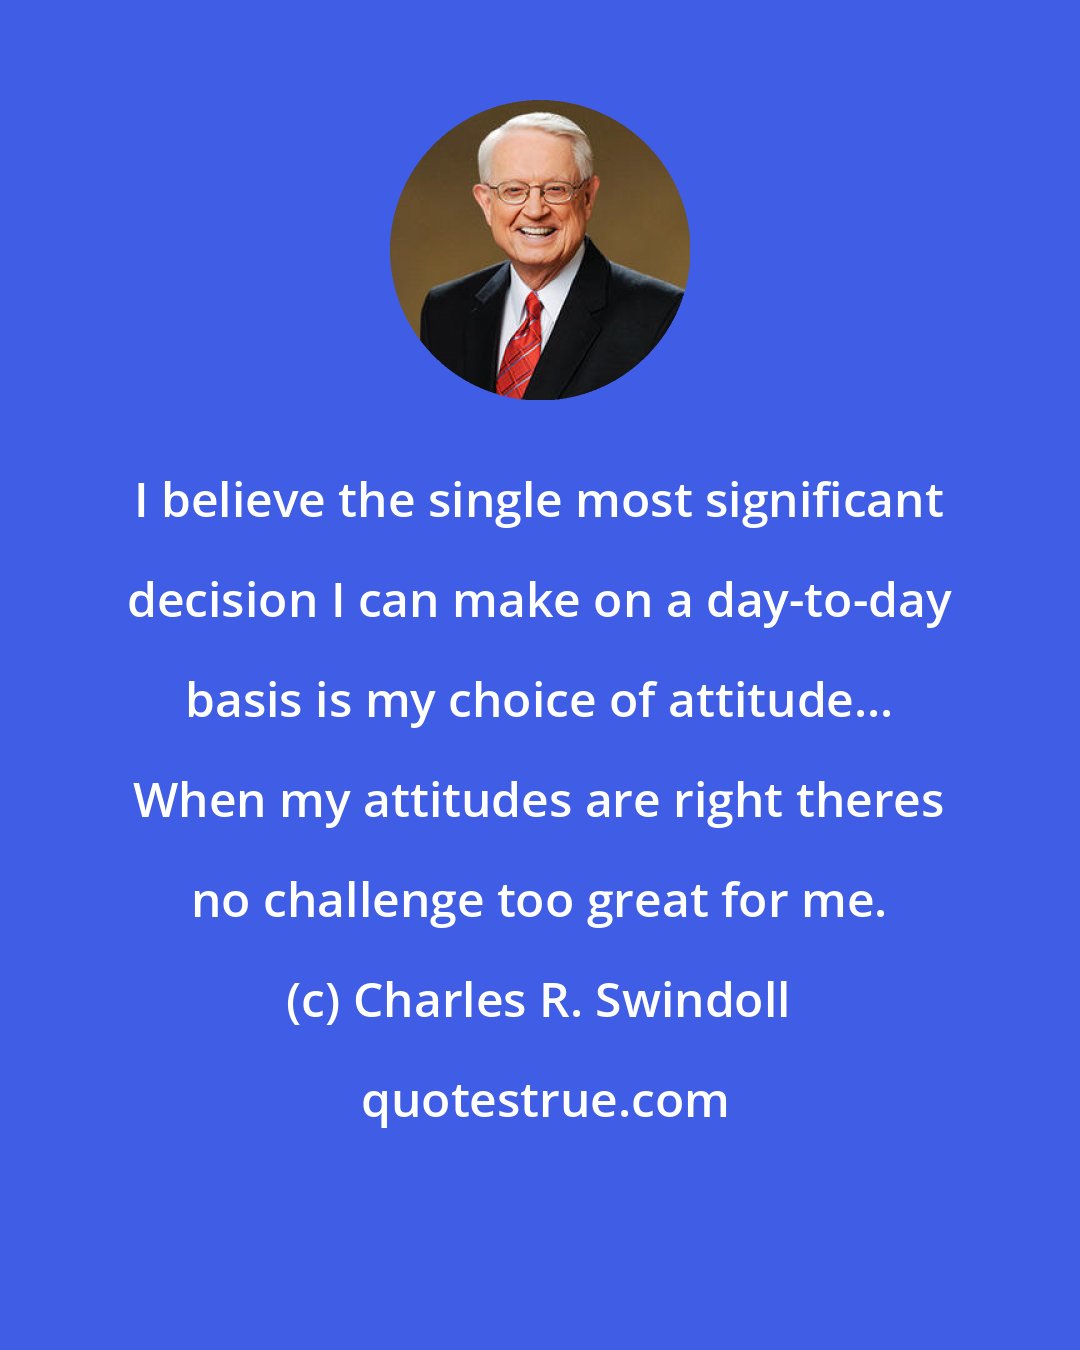 Charles R. Swindoll: I believe the single most significant decision I can make on a day-to-day basis is my choice of attitude... When my attitudes are right theres no challenge too great for me.